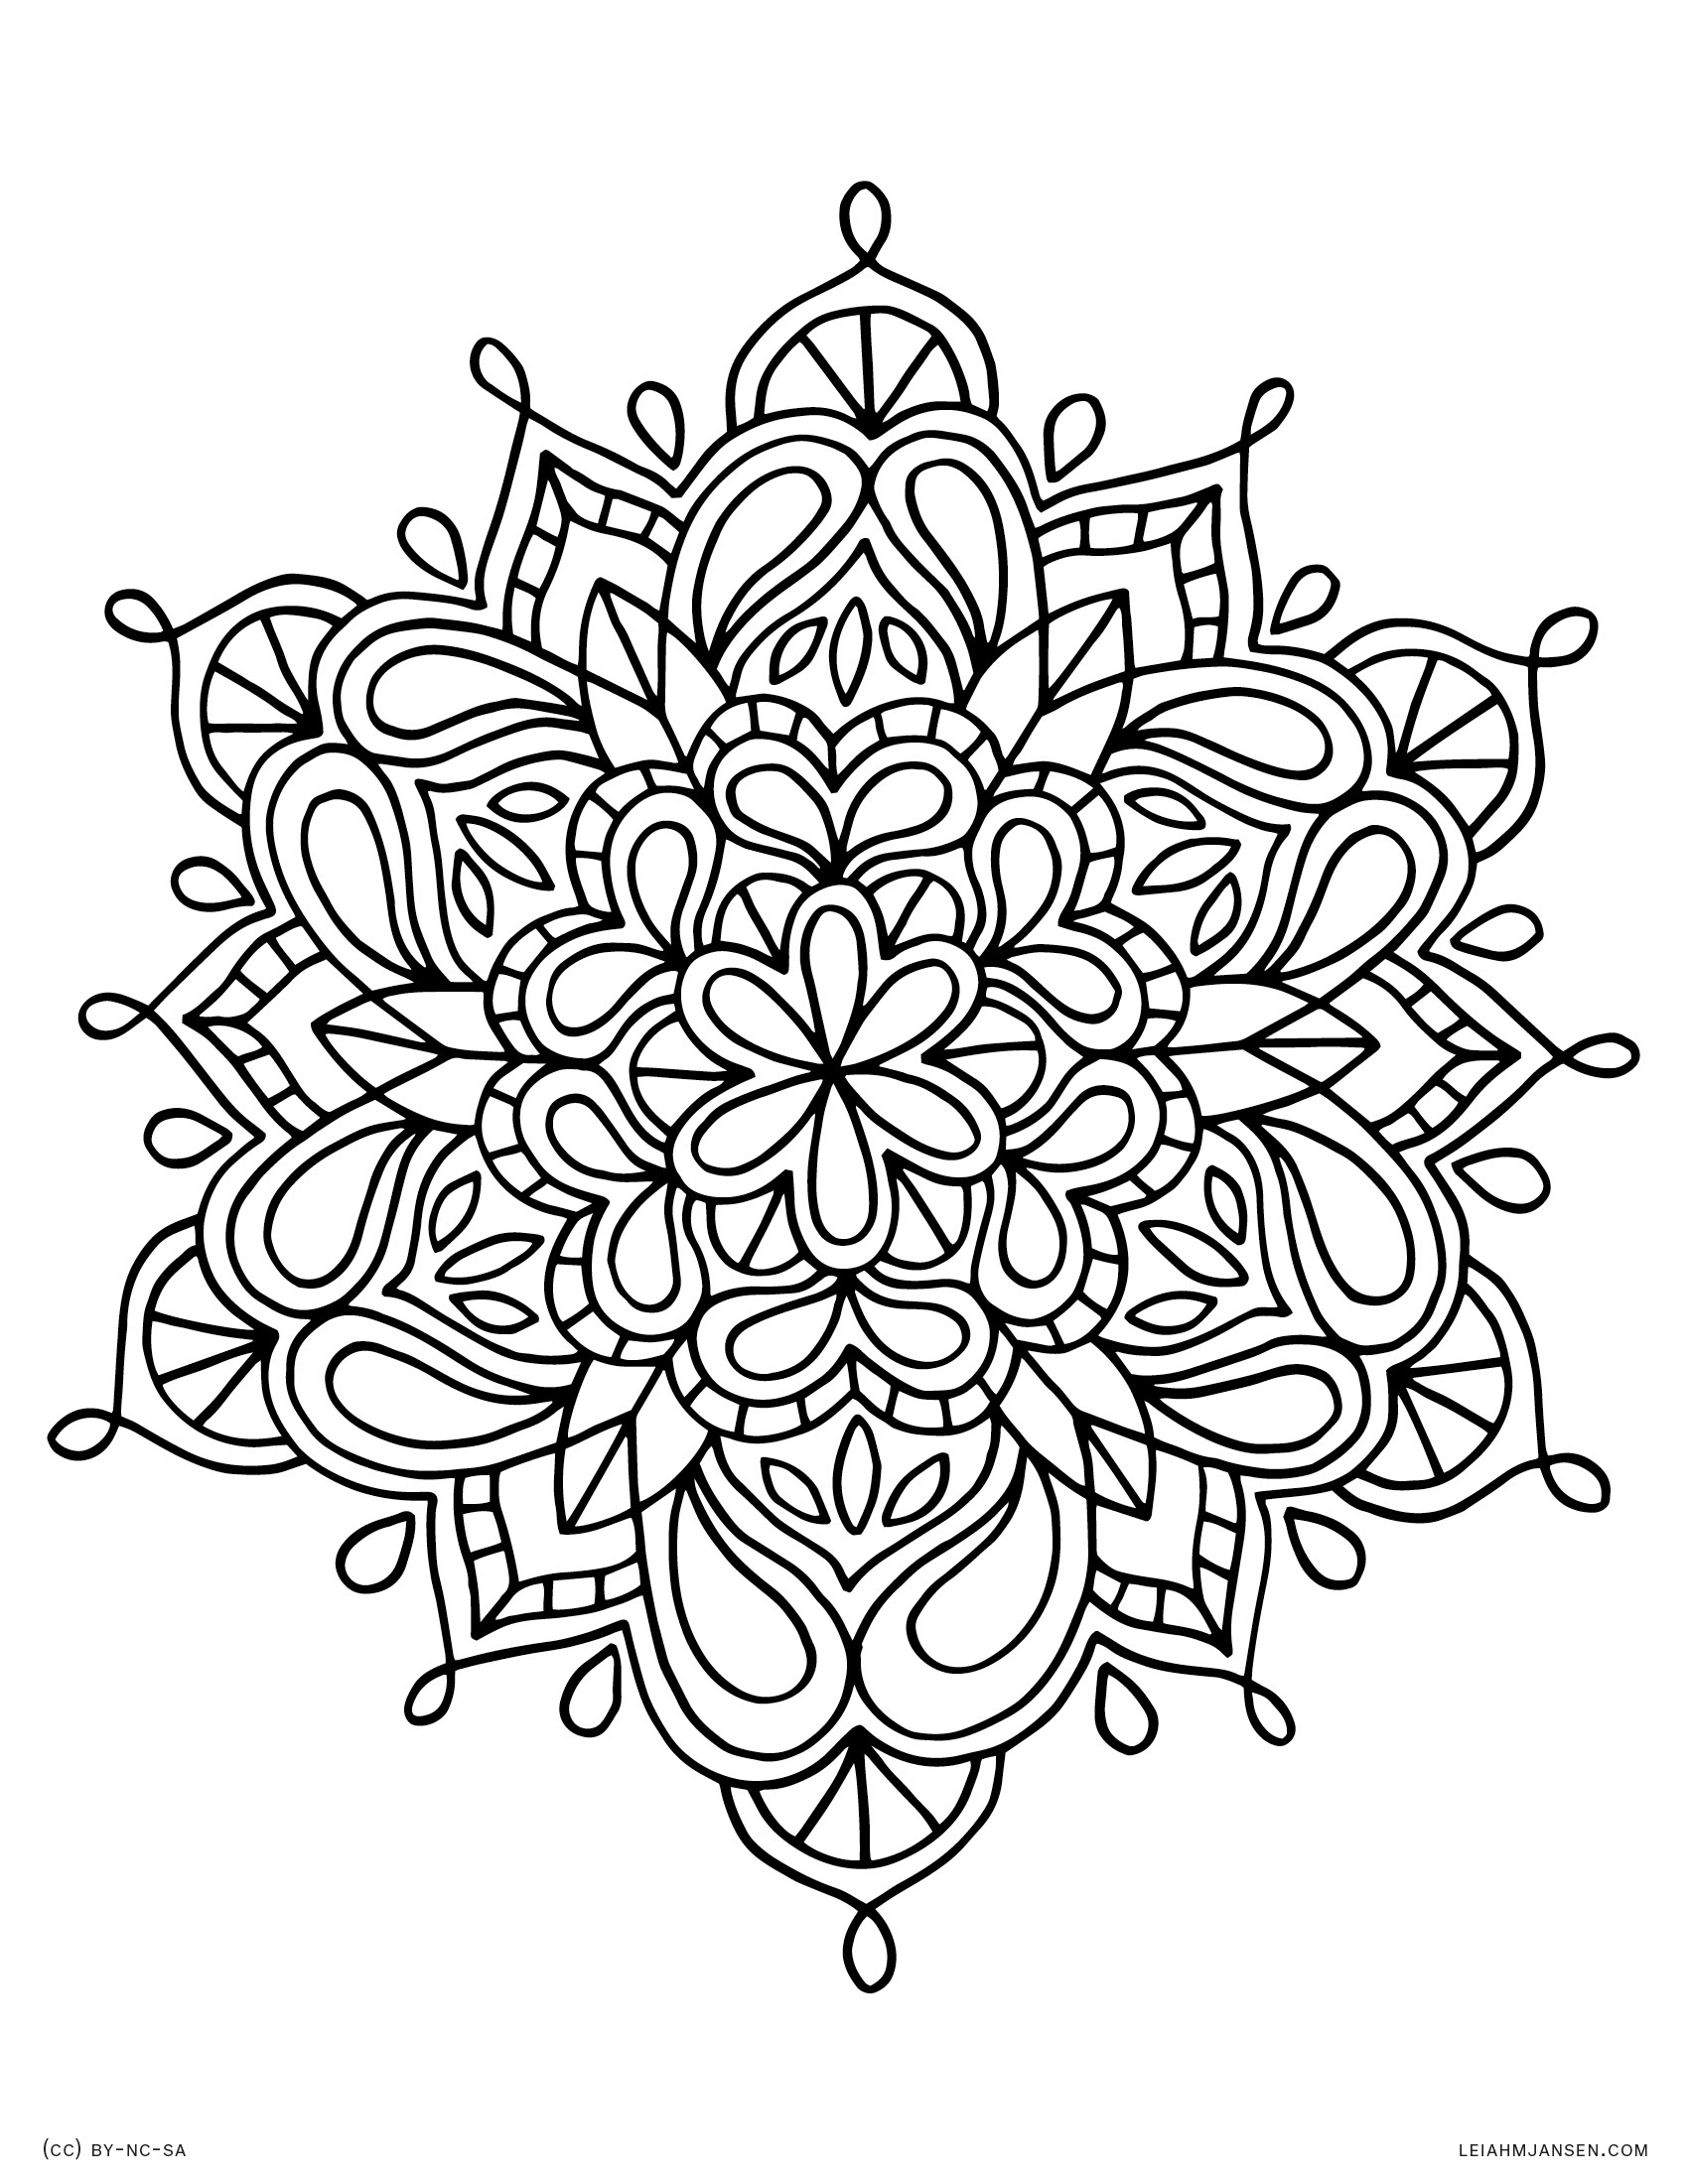 Coloring Pages - Free Printable Coloring Sheets